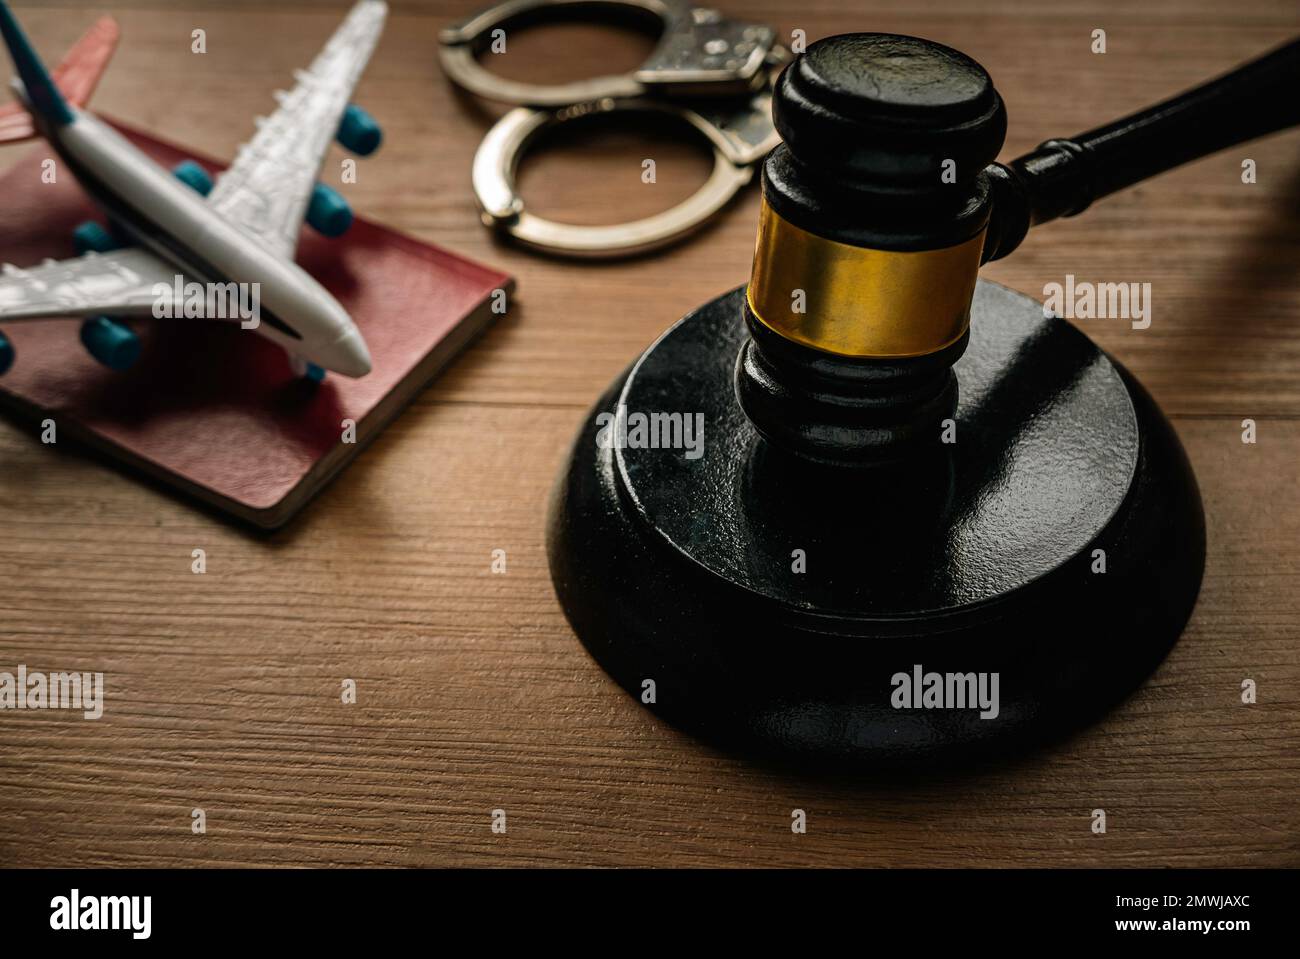 Concept of aviation law,international law, immigration law and citizenship rights. Gavel, passport, hand cuff and toy plane on a wooden background. Stock Photo